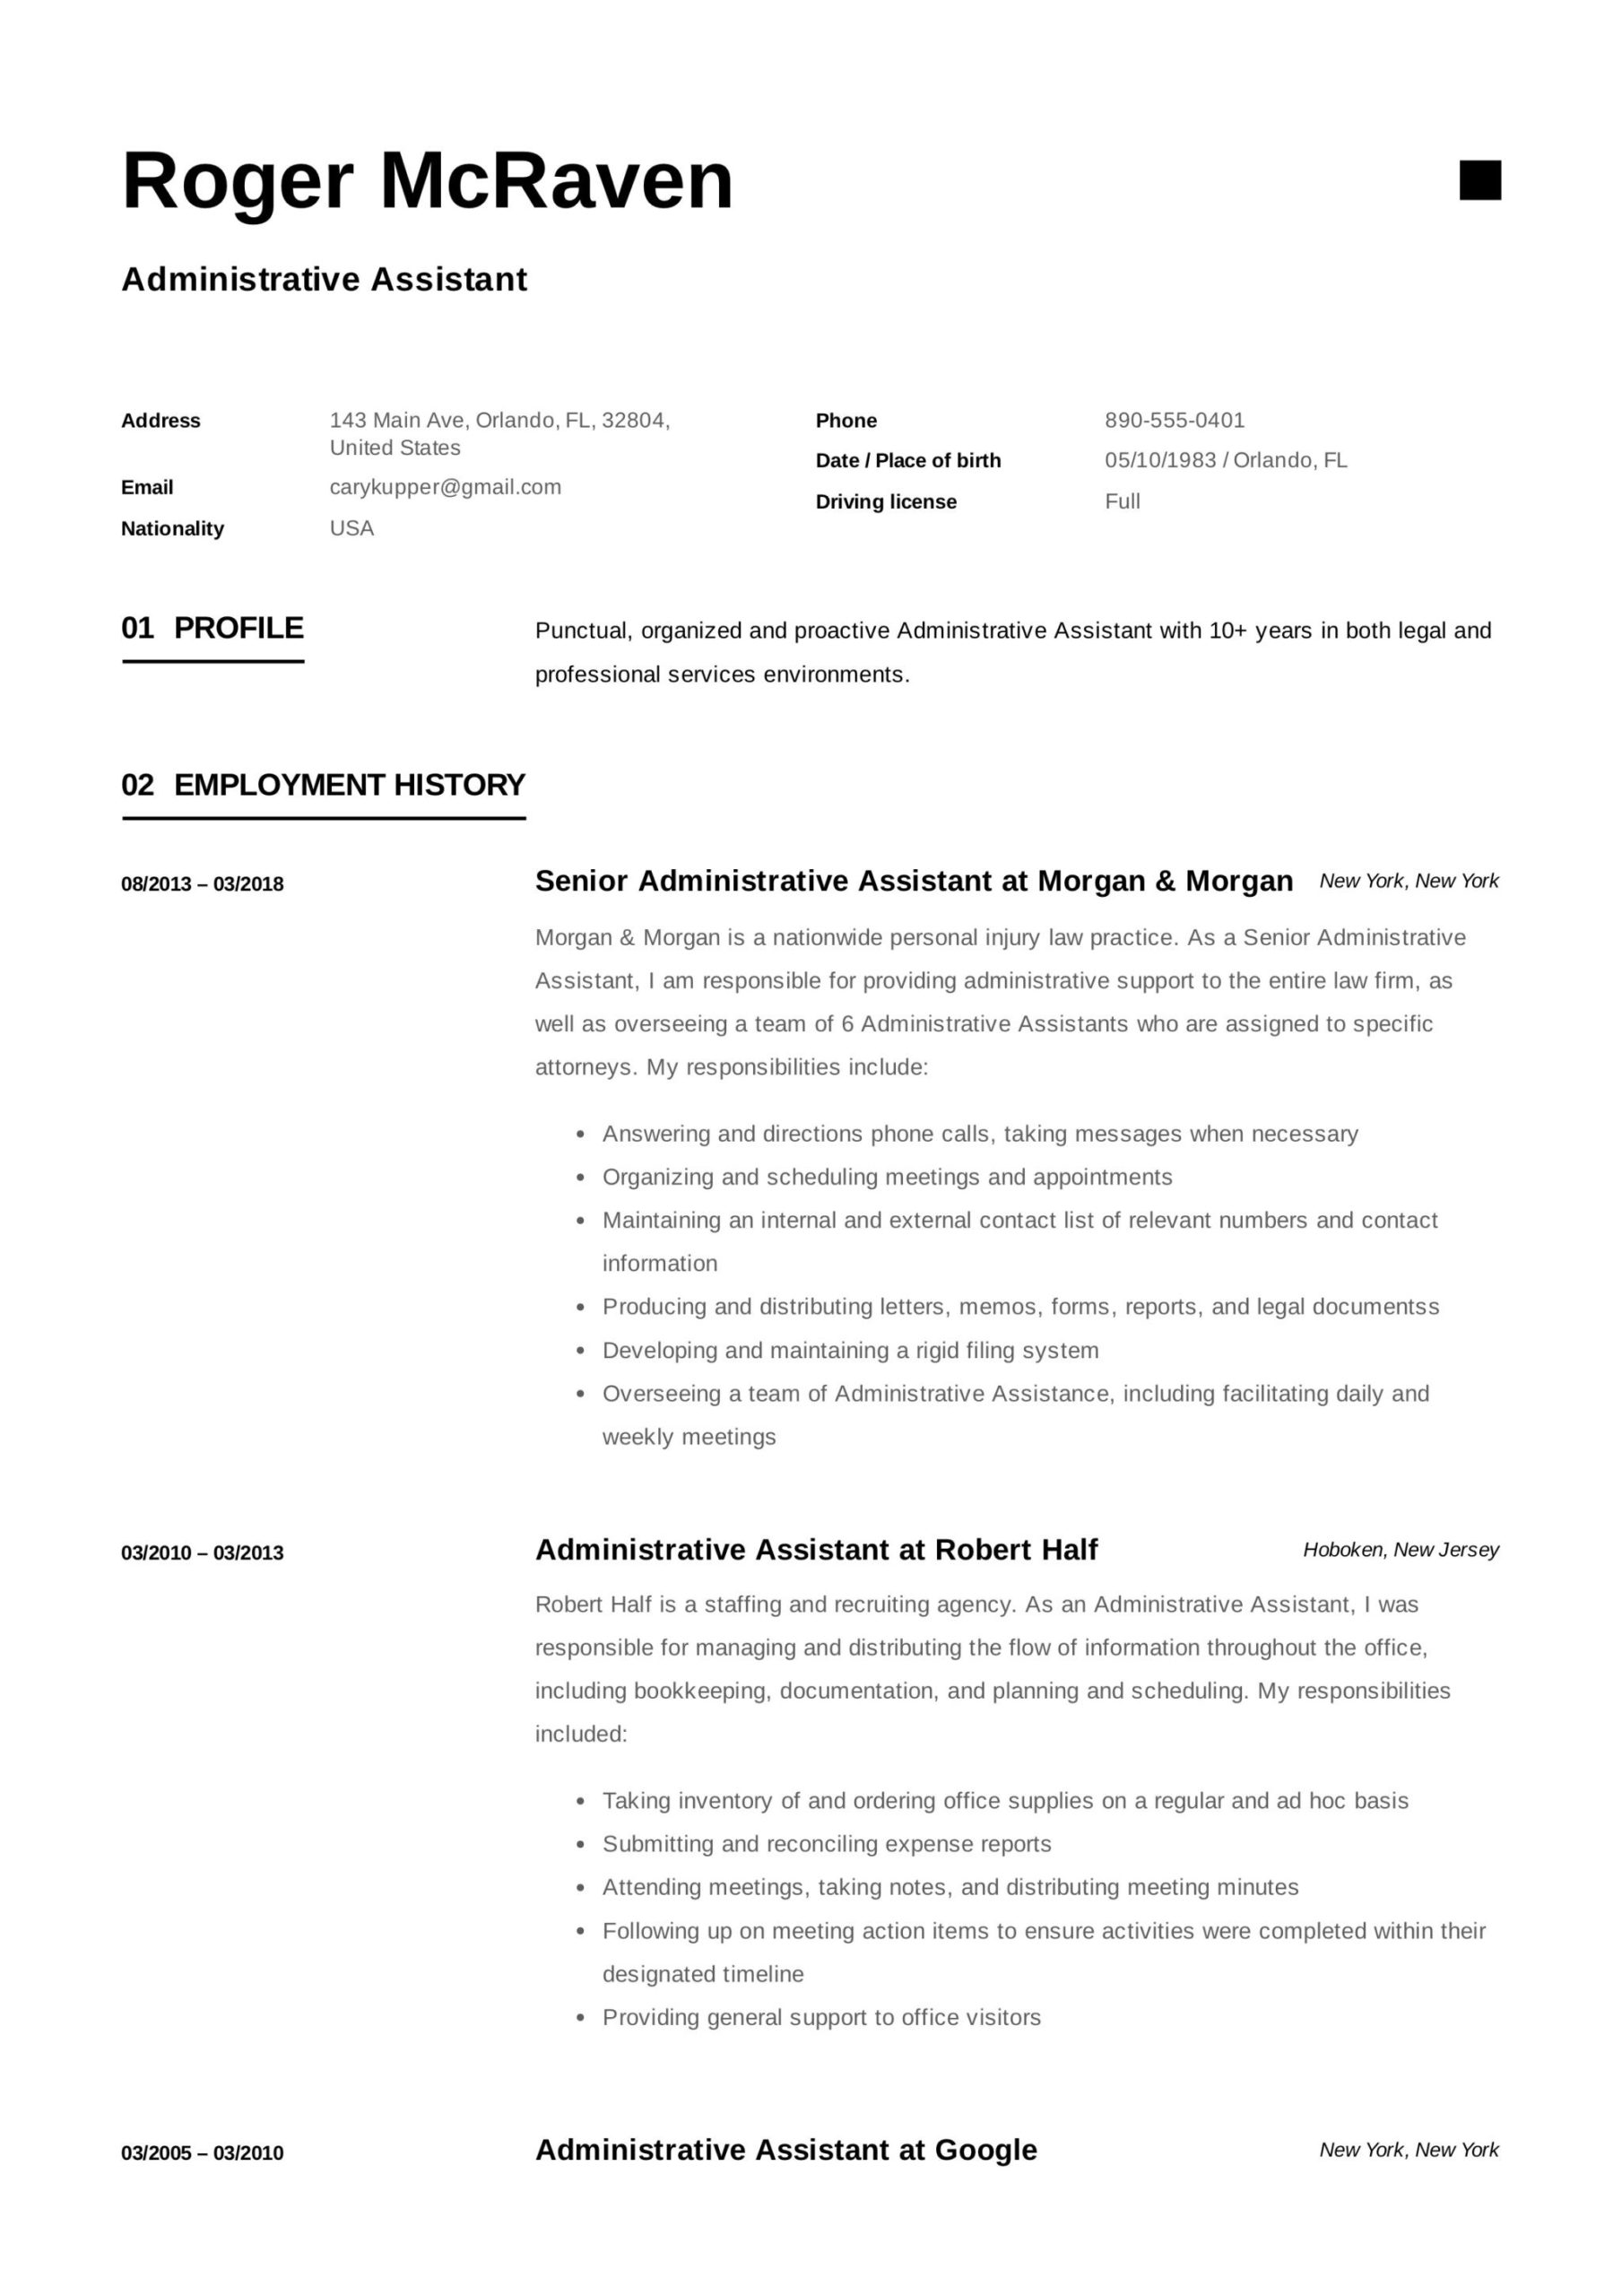 Sample Resume Objective Statements for Administrative assistant 19 Administrative assistant Resumes & Guide Pdf 2022